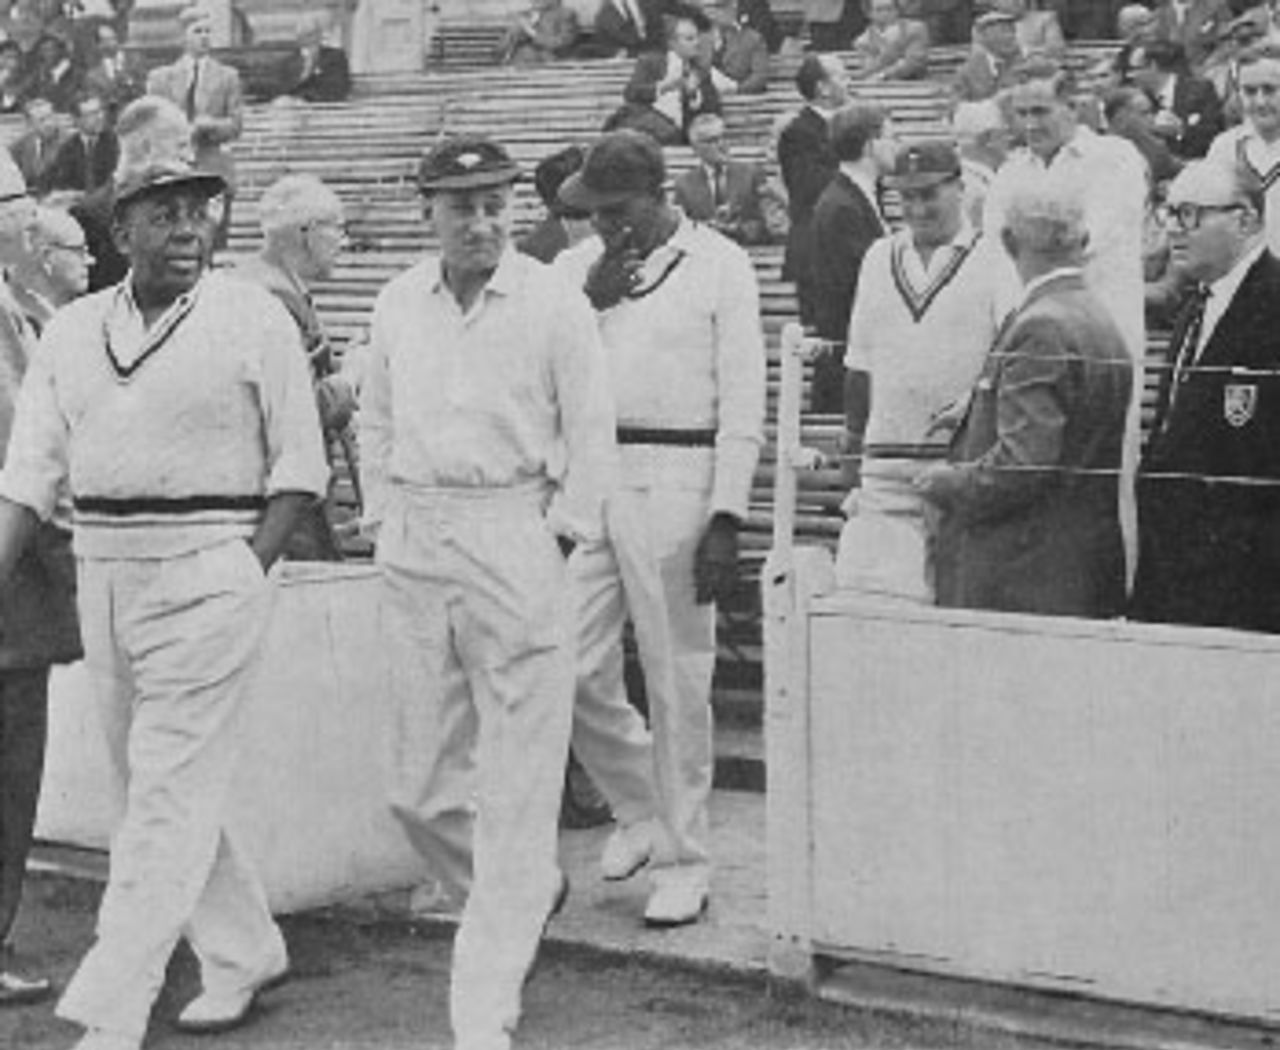 Sir Learie Constantine leads out his team to meet the West Indian Tourists in their final match at The Oval on Saturday, September 14, 1963. Behind Sir Learie is Sir Leonard Hutton. A crowd of 6,000 watched the game, in aid of the fund for the Anglo-Caribbean Social Centre, which the Tourists won by 62 runs. West Indies totalled 337 and Sir Learie Constantine's Twelve replied with 275